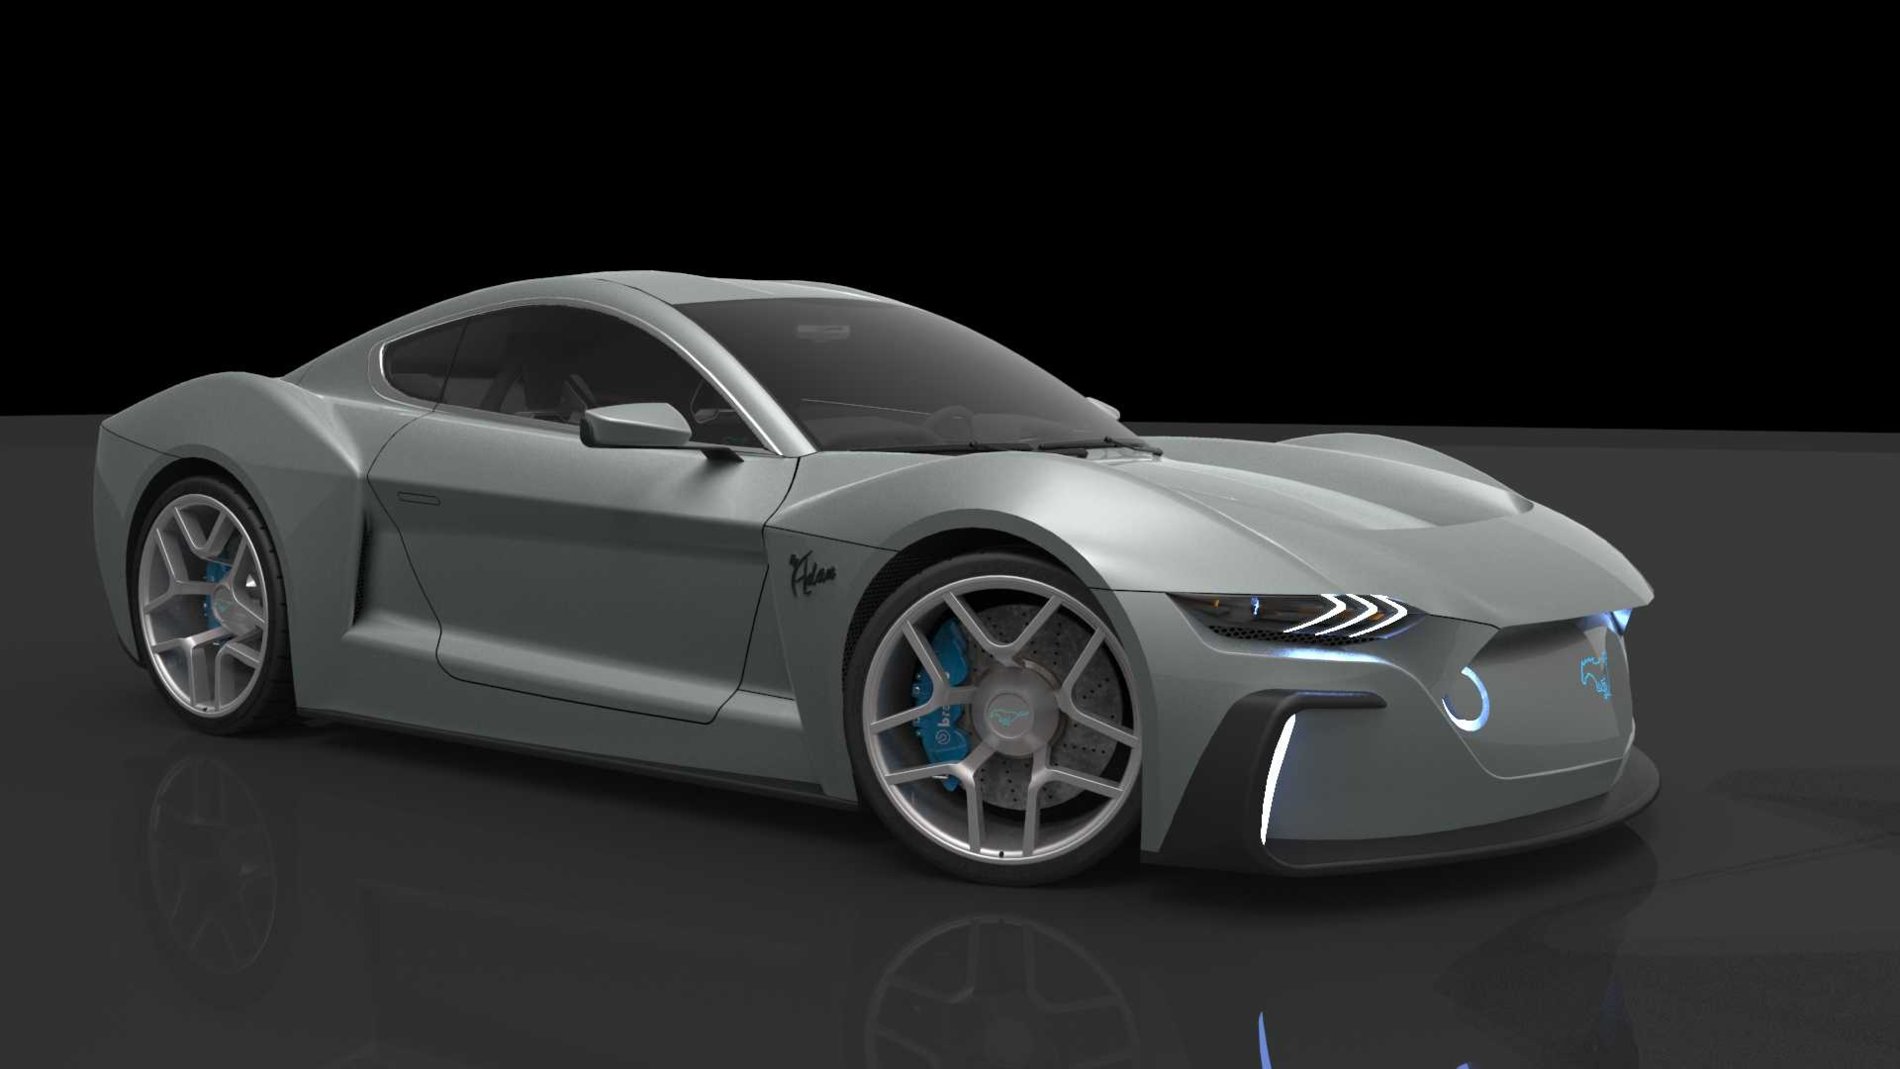 Electric Mustang concept video (not official) | 2015+ S550 Mustang